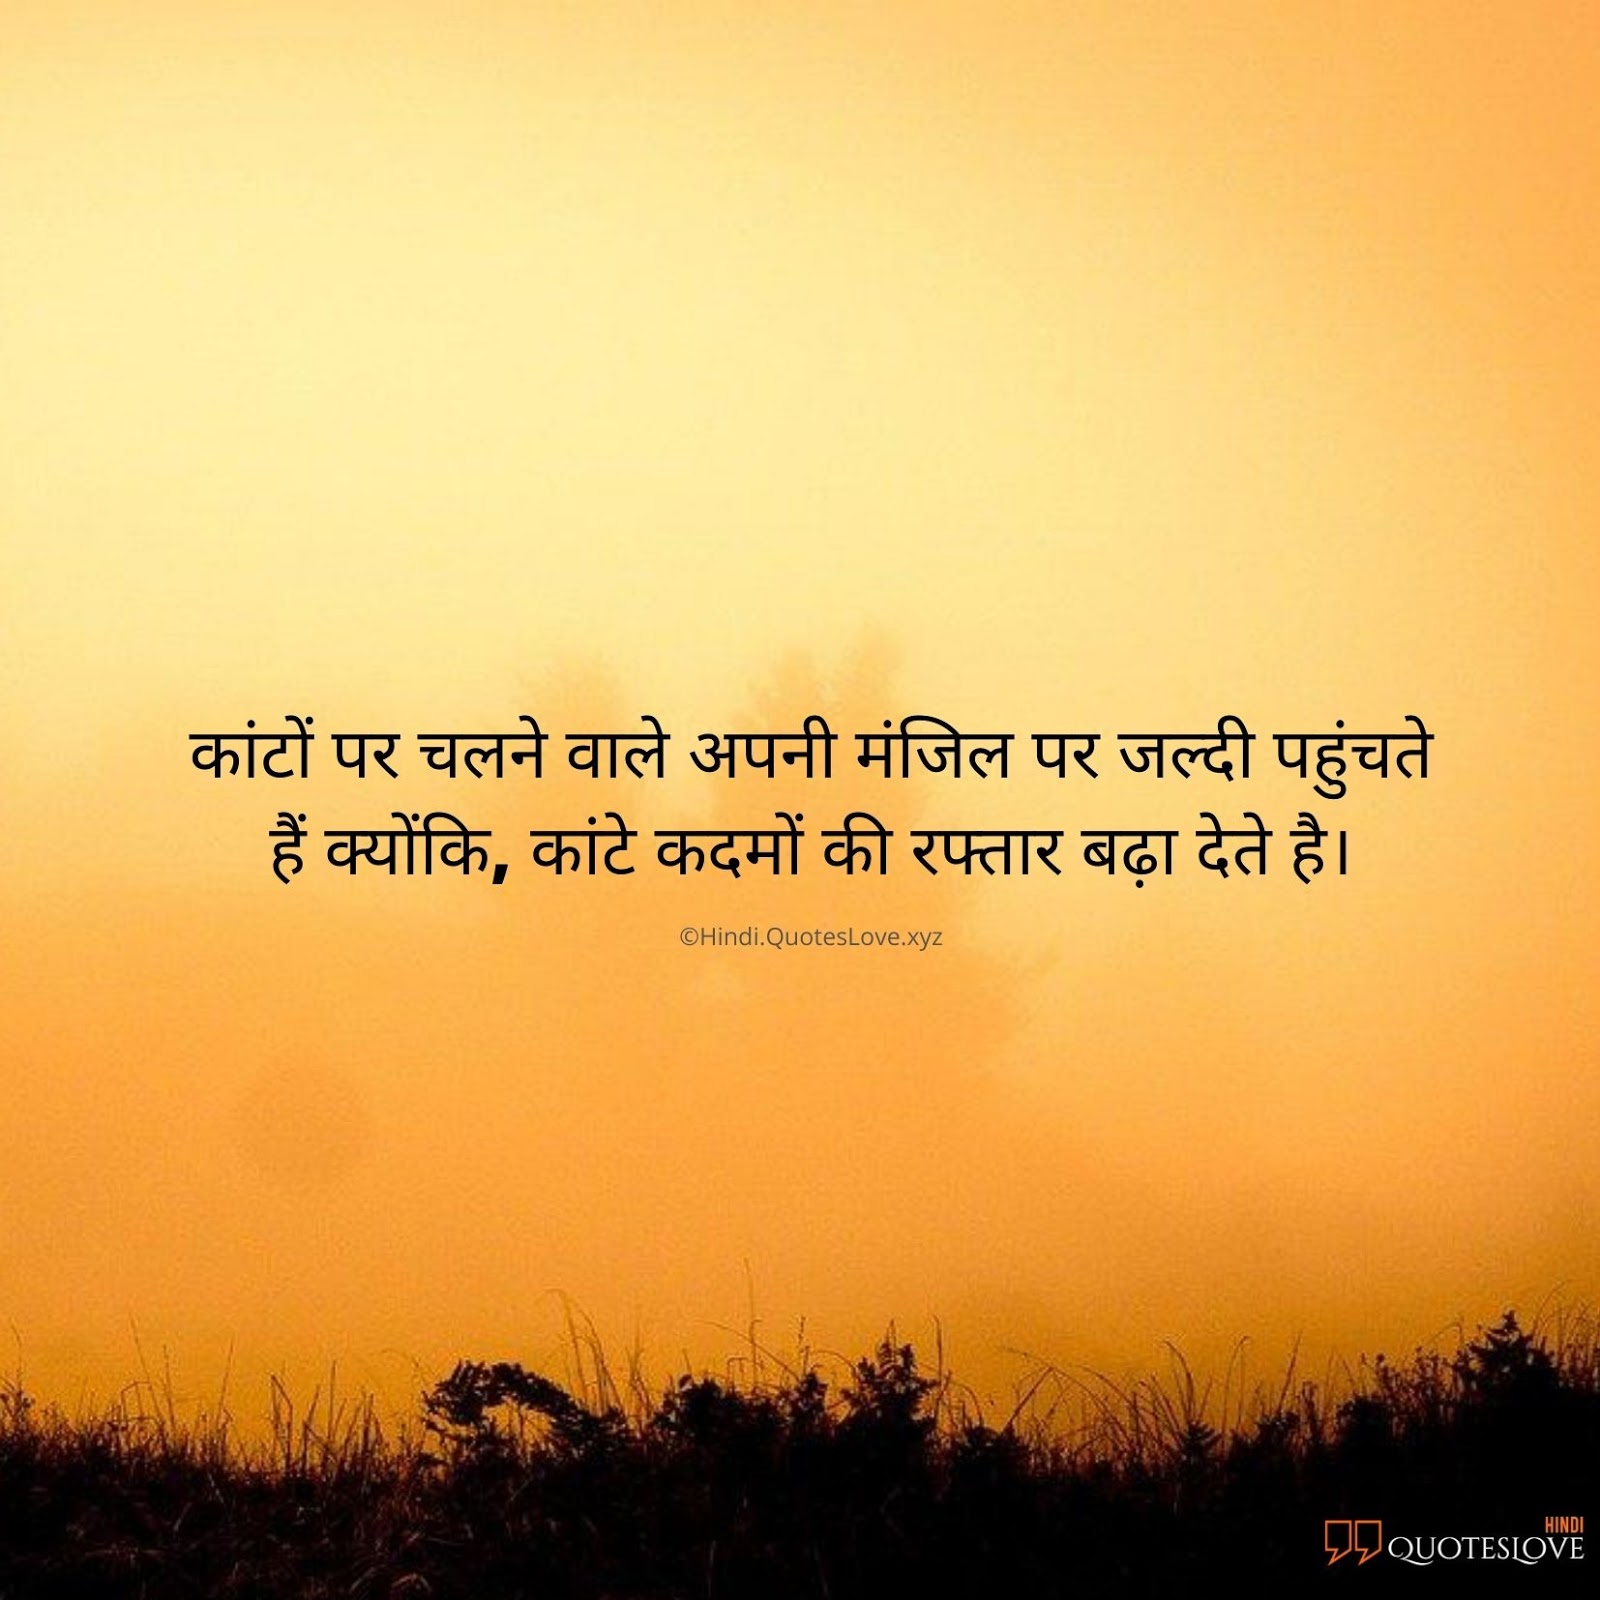 Motivational Quotes For Students In Hindi